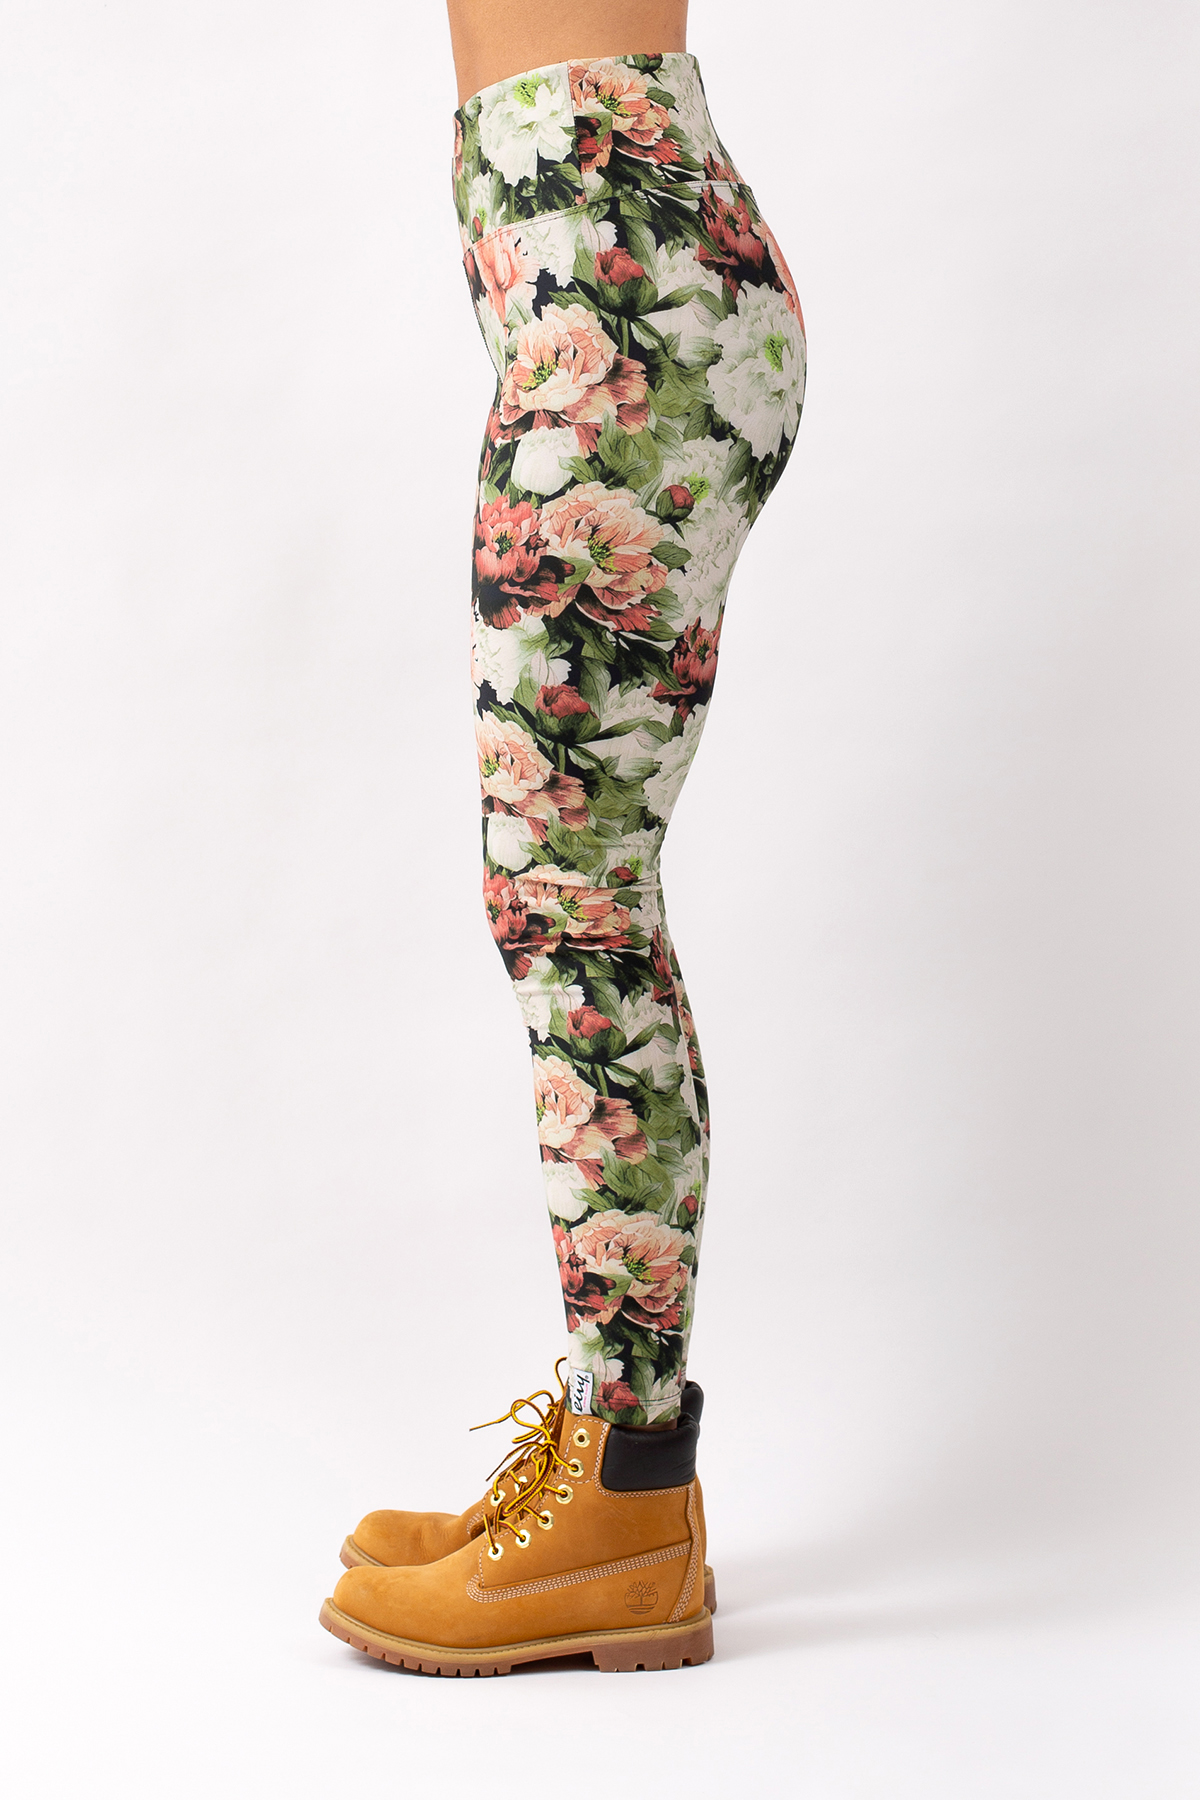 Base Layer | Icecold Tights - Autumn Bloom | L